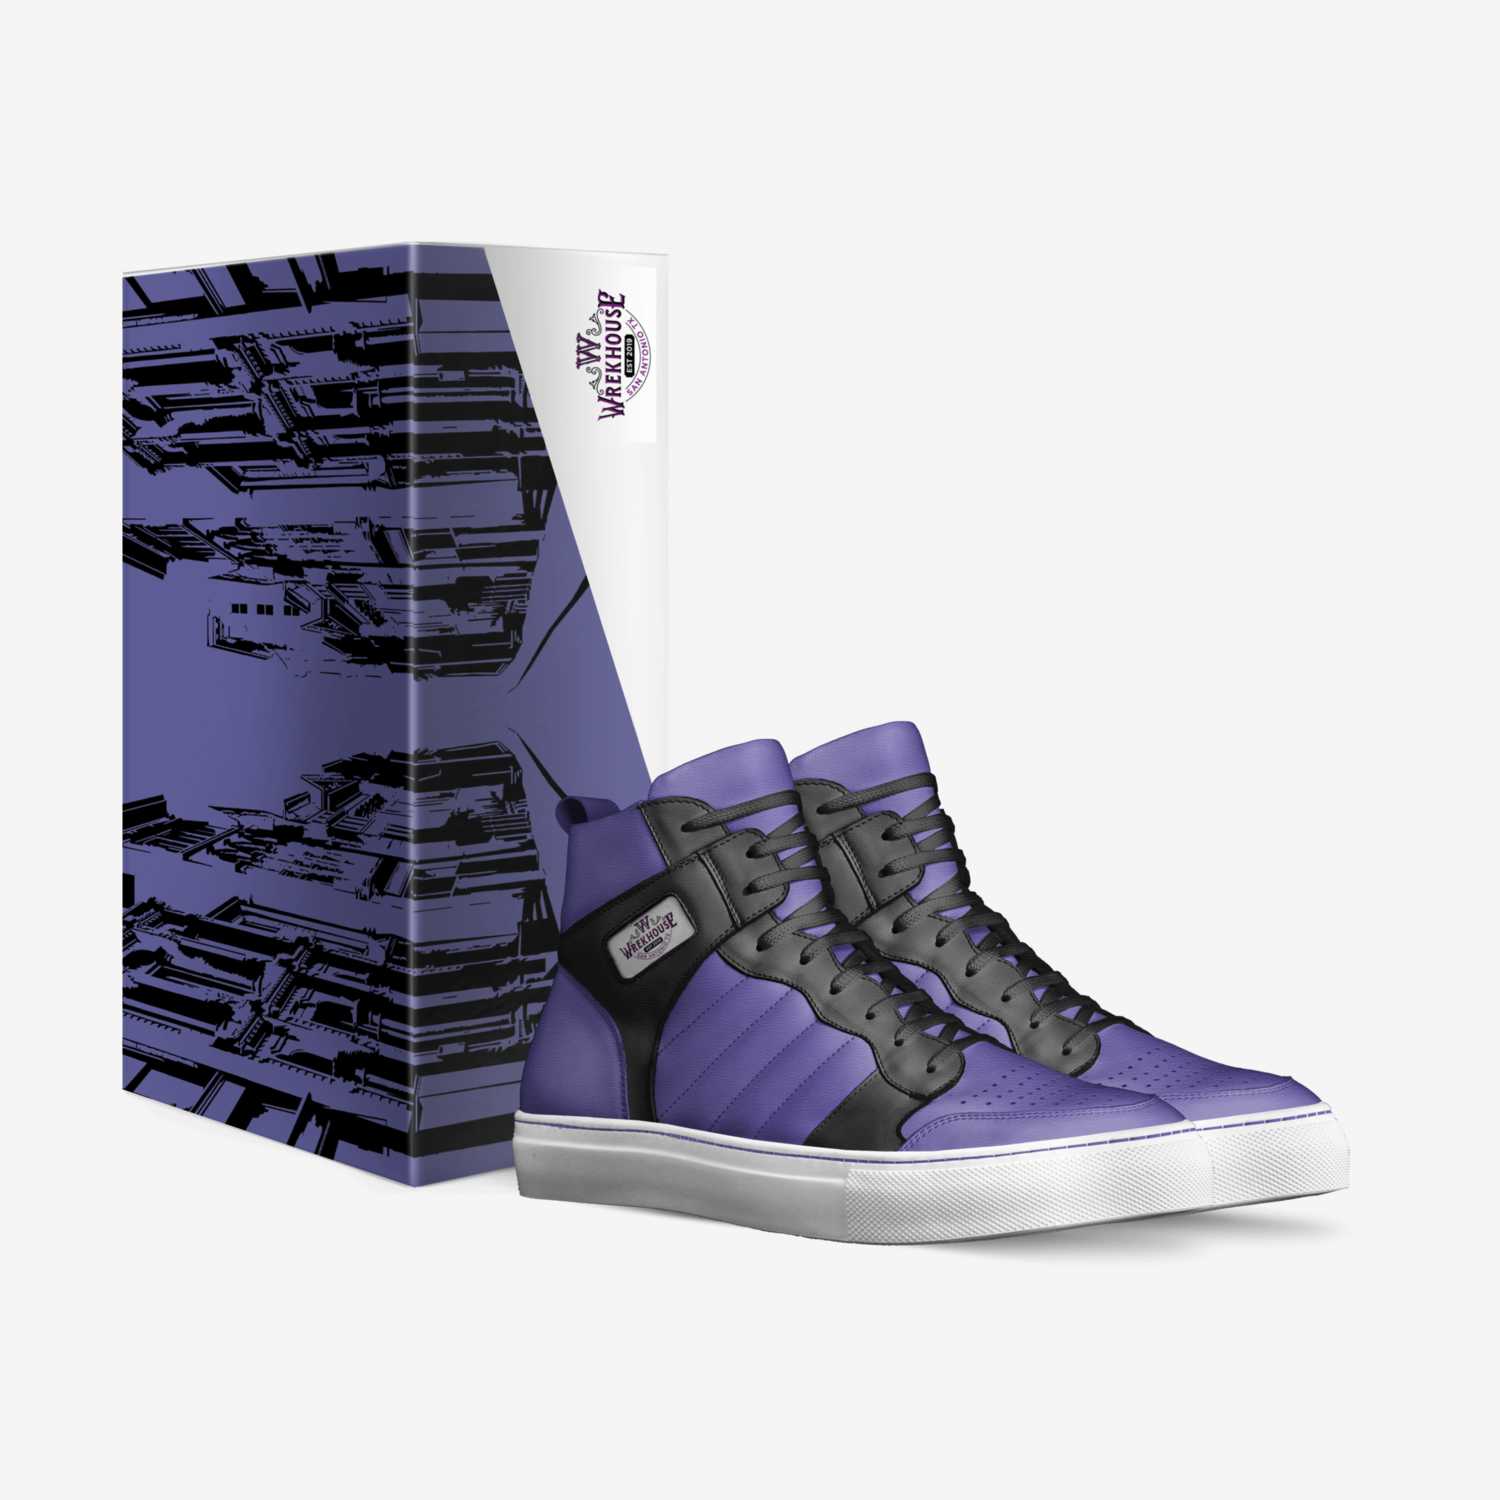 Nightmare Ranger 1 custom made in Italy shoes by Cedric Denson | Box view